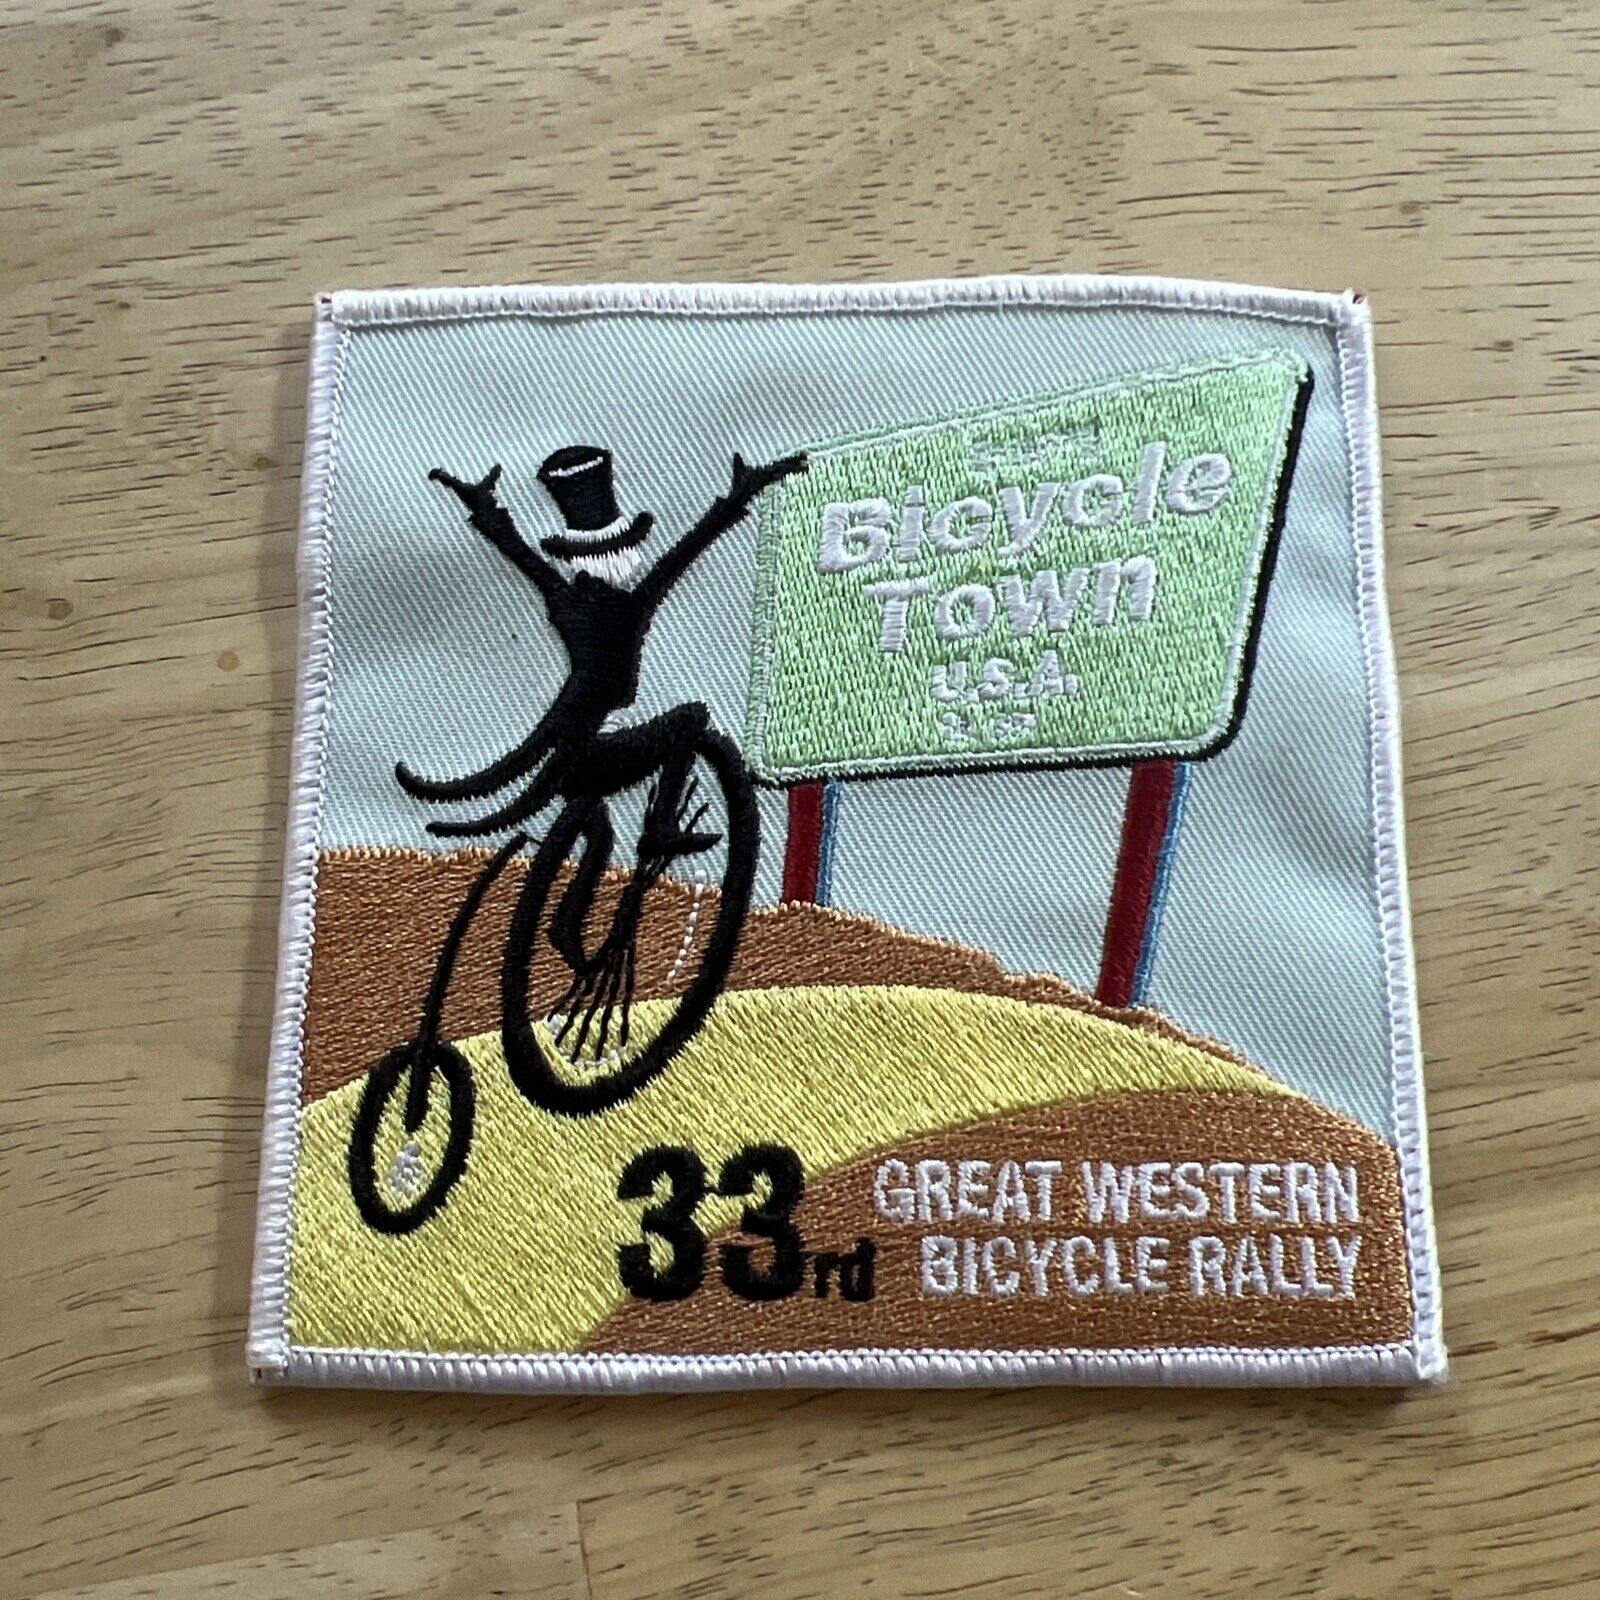 Vintage 33rd great western bicycle rally, bicycle town USA patch